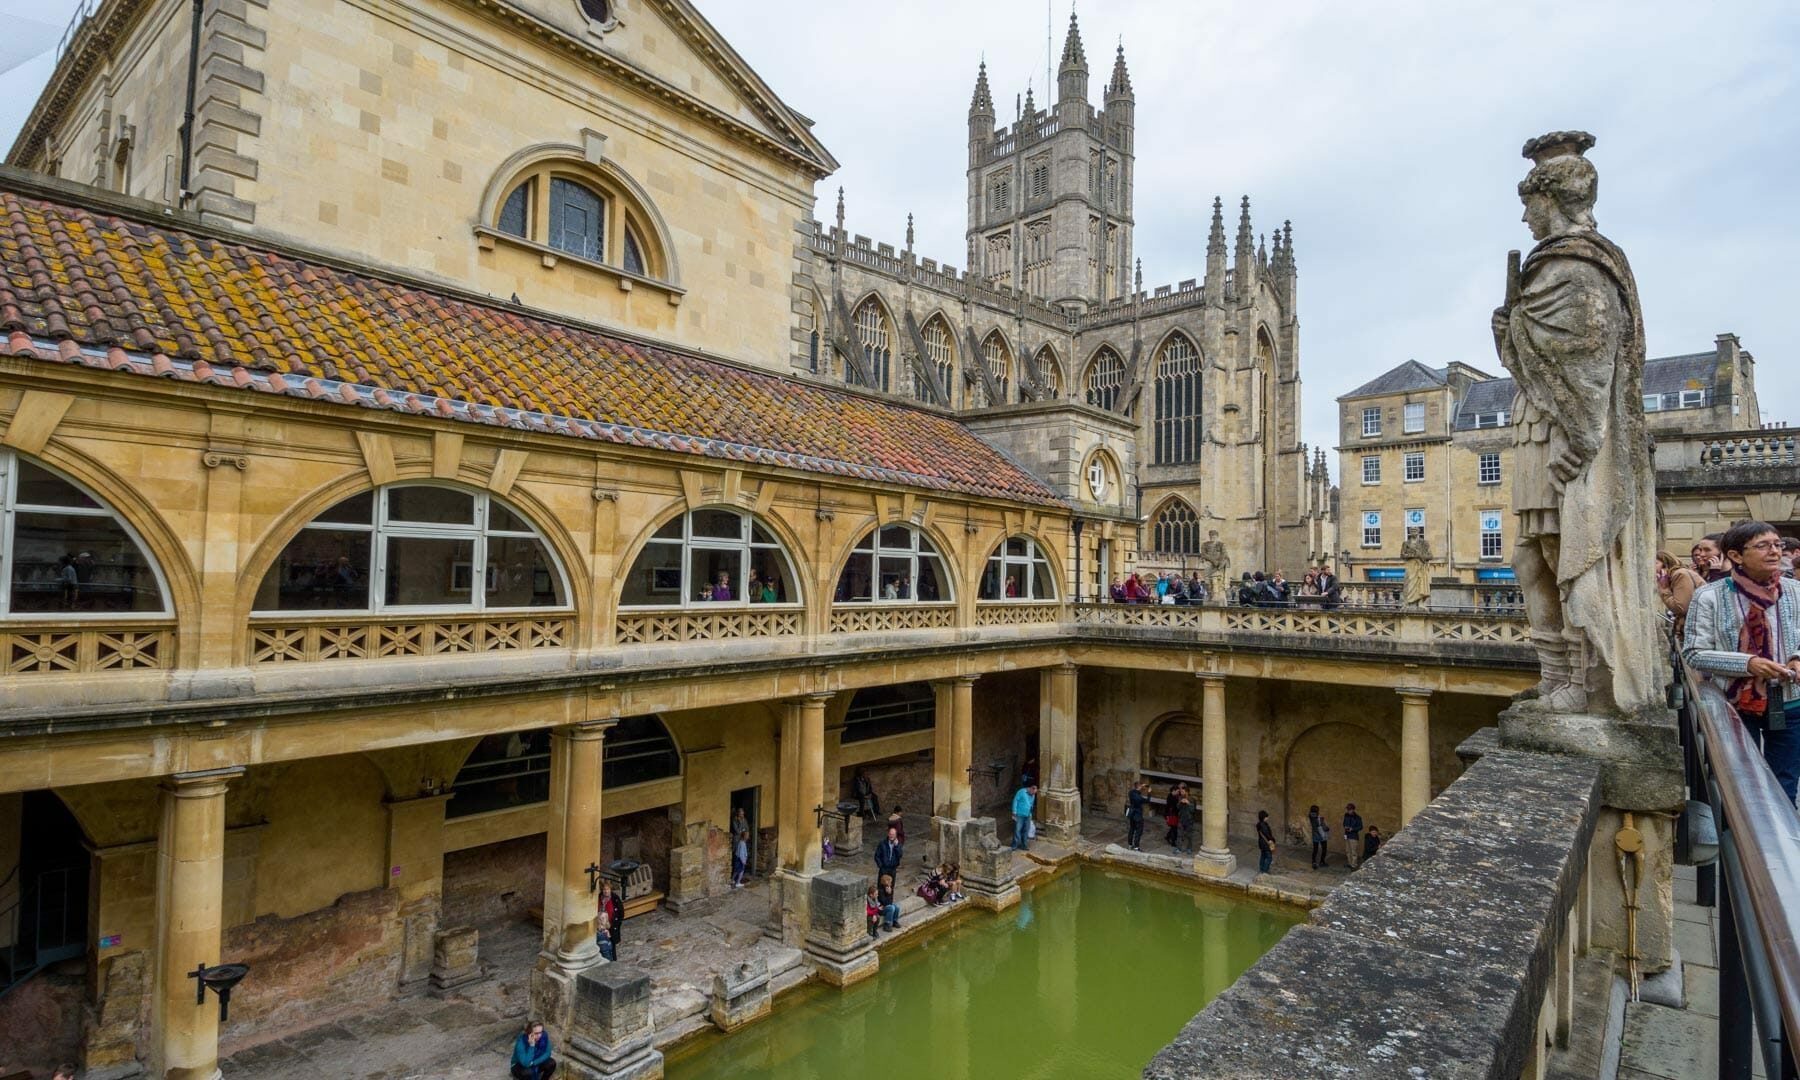 The Best Things to do in Bath, UK